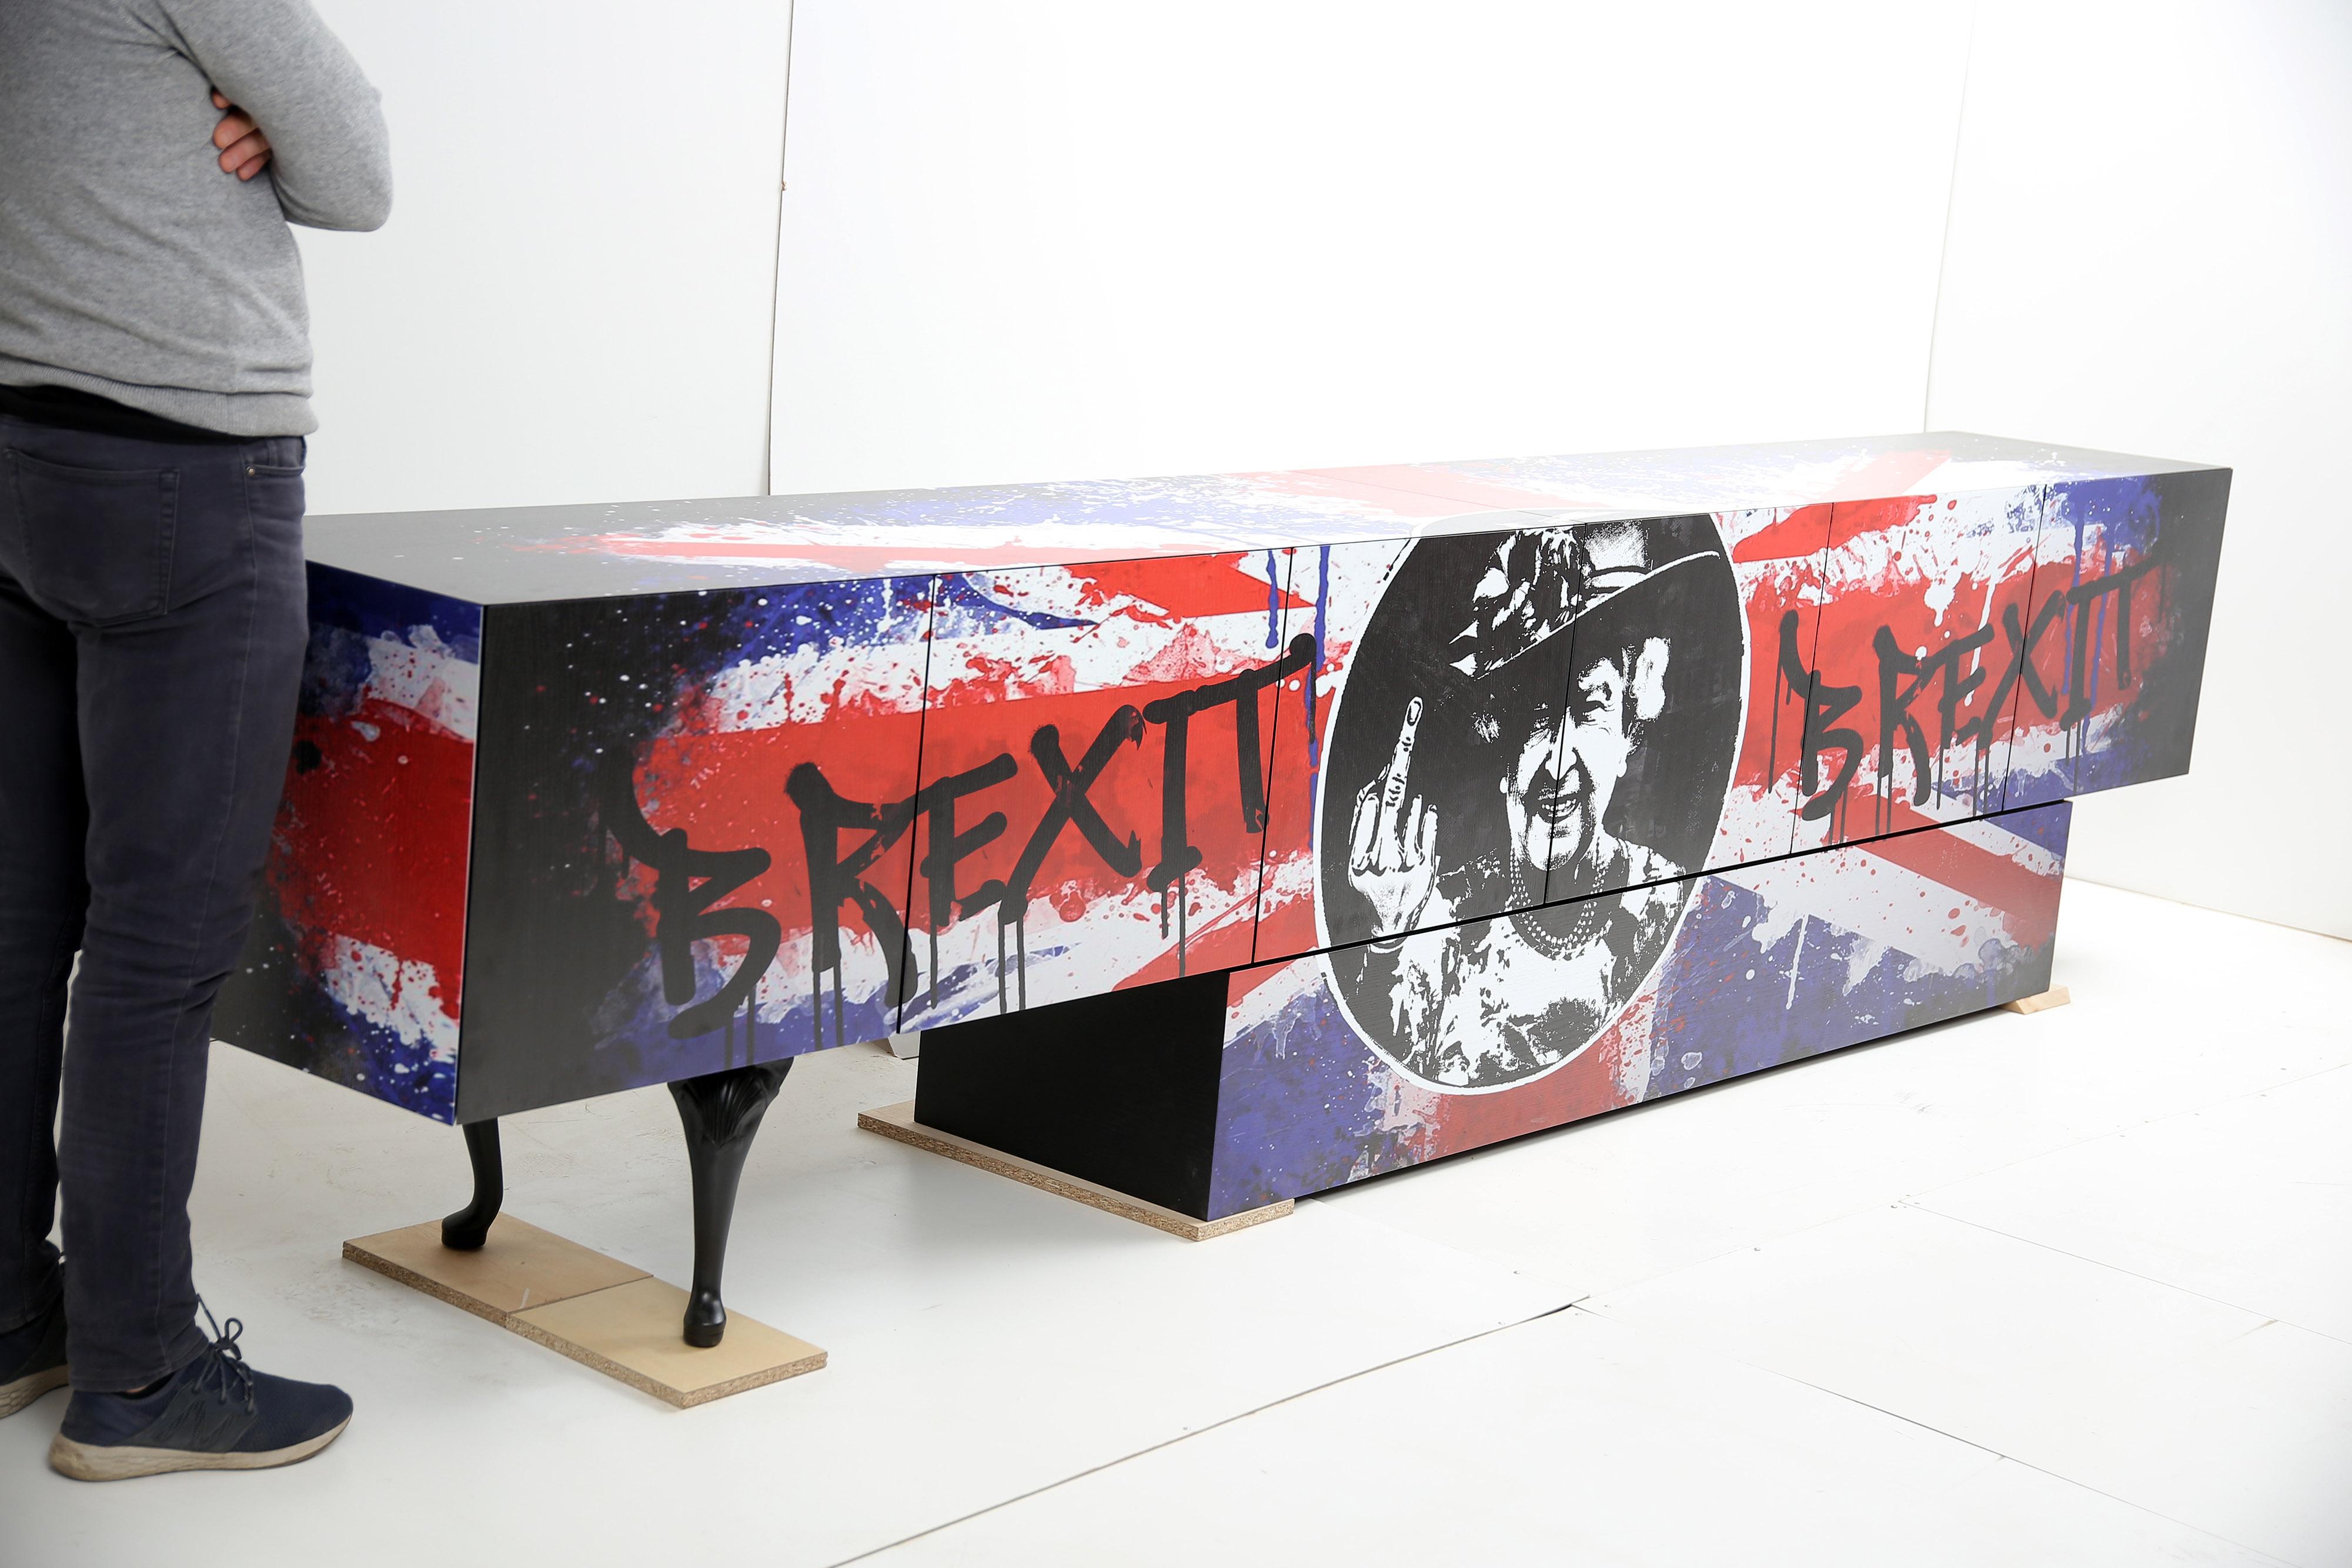 New Sideboard Brexit by Railis Design. Made combining MODERN, CLASSIC and GRAFFITI style. Fully functional and practical piece of furniture. Artwork directly printed on wood. Aside from its aesthetic beauty, the piece features 6 doors with touch